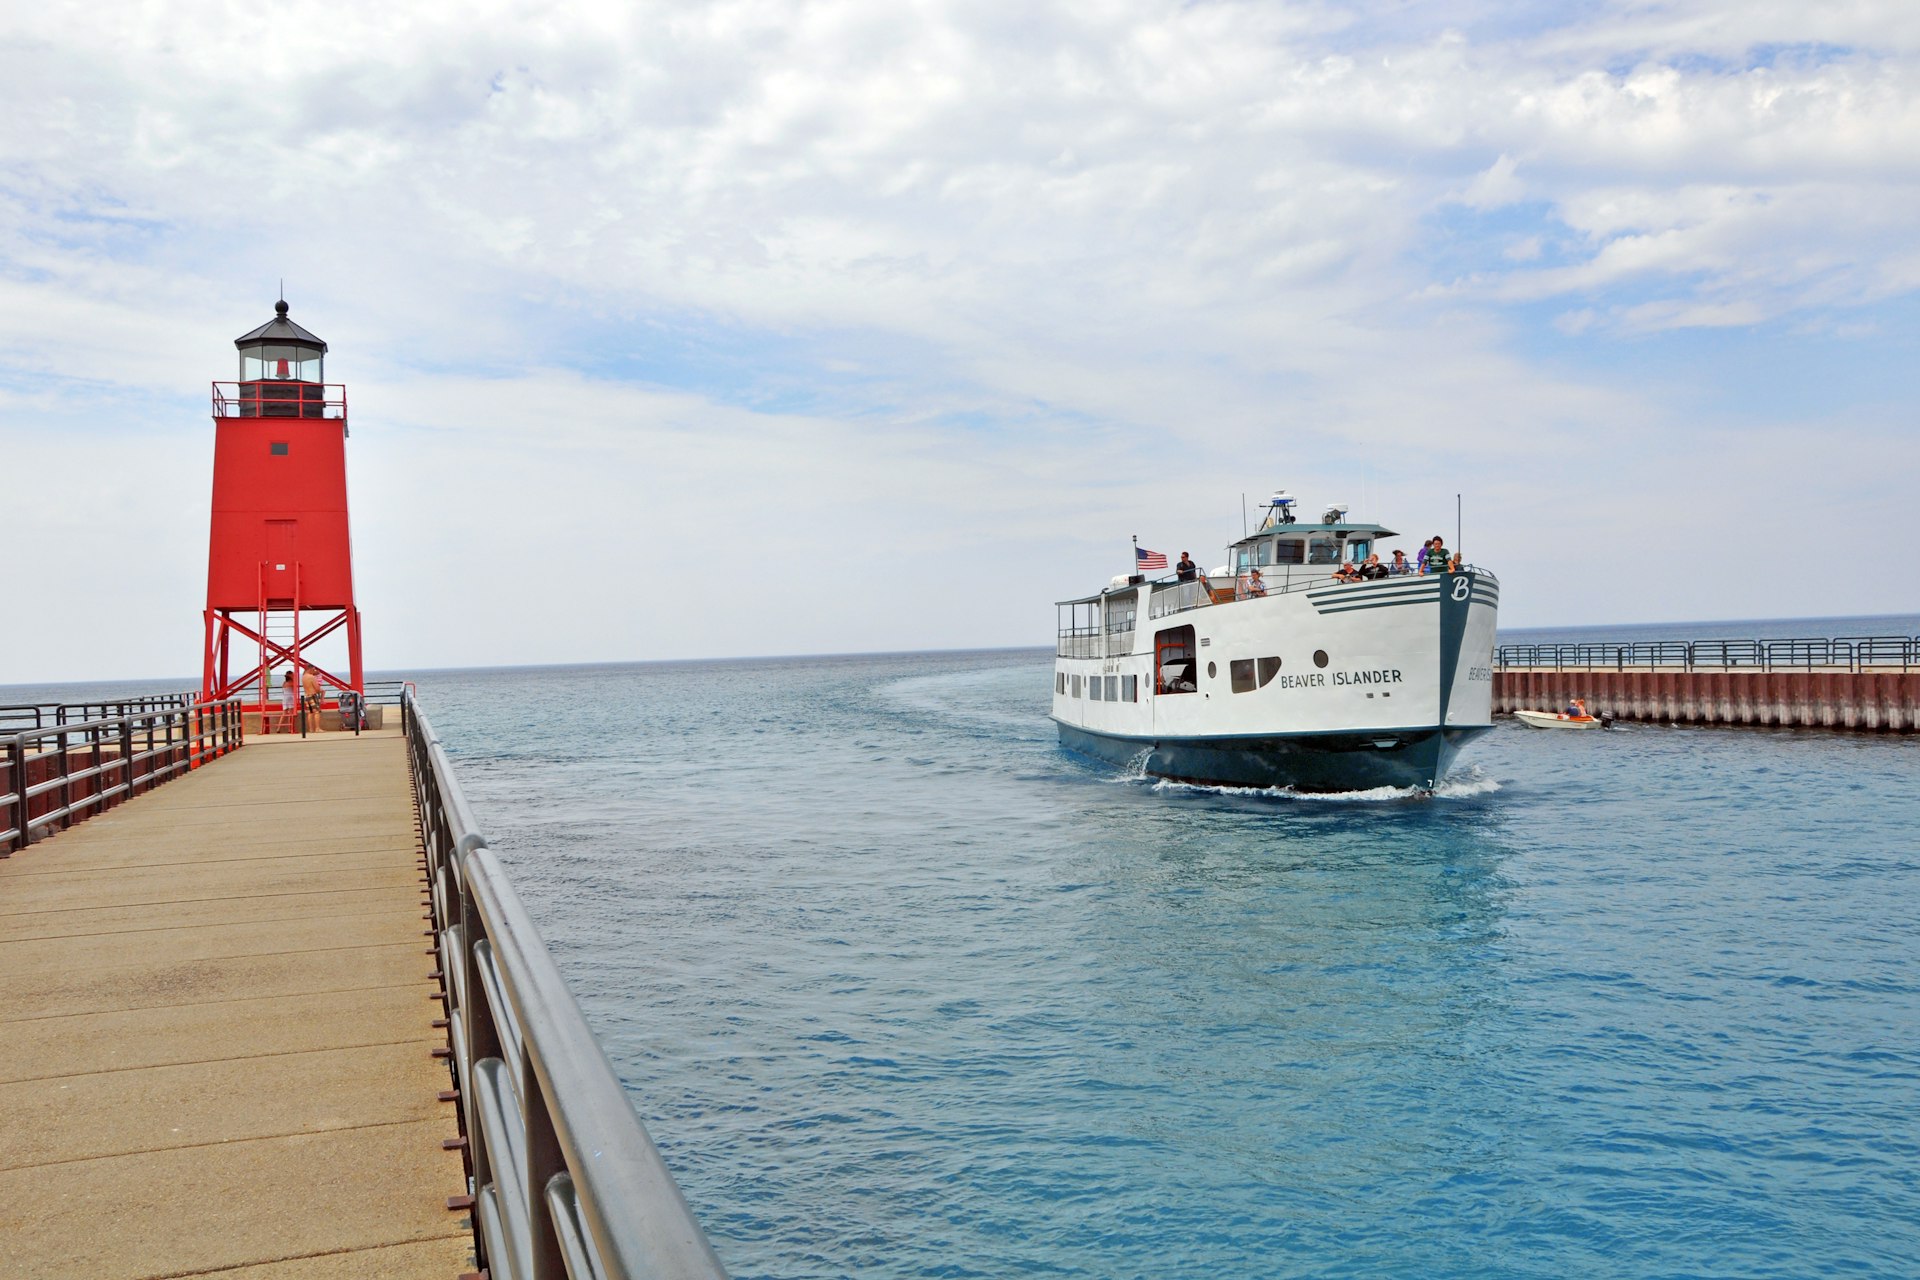 The Beaver Islander ferry passing the Charlevoix South Pier Lighthouse in the Pine River Channel between Lake Michigan and Lake Charlevoix